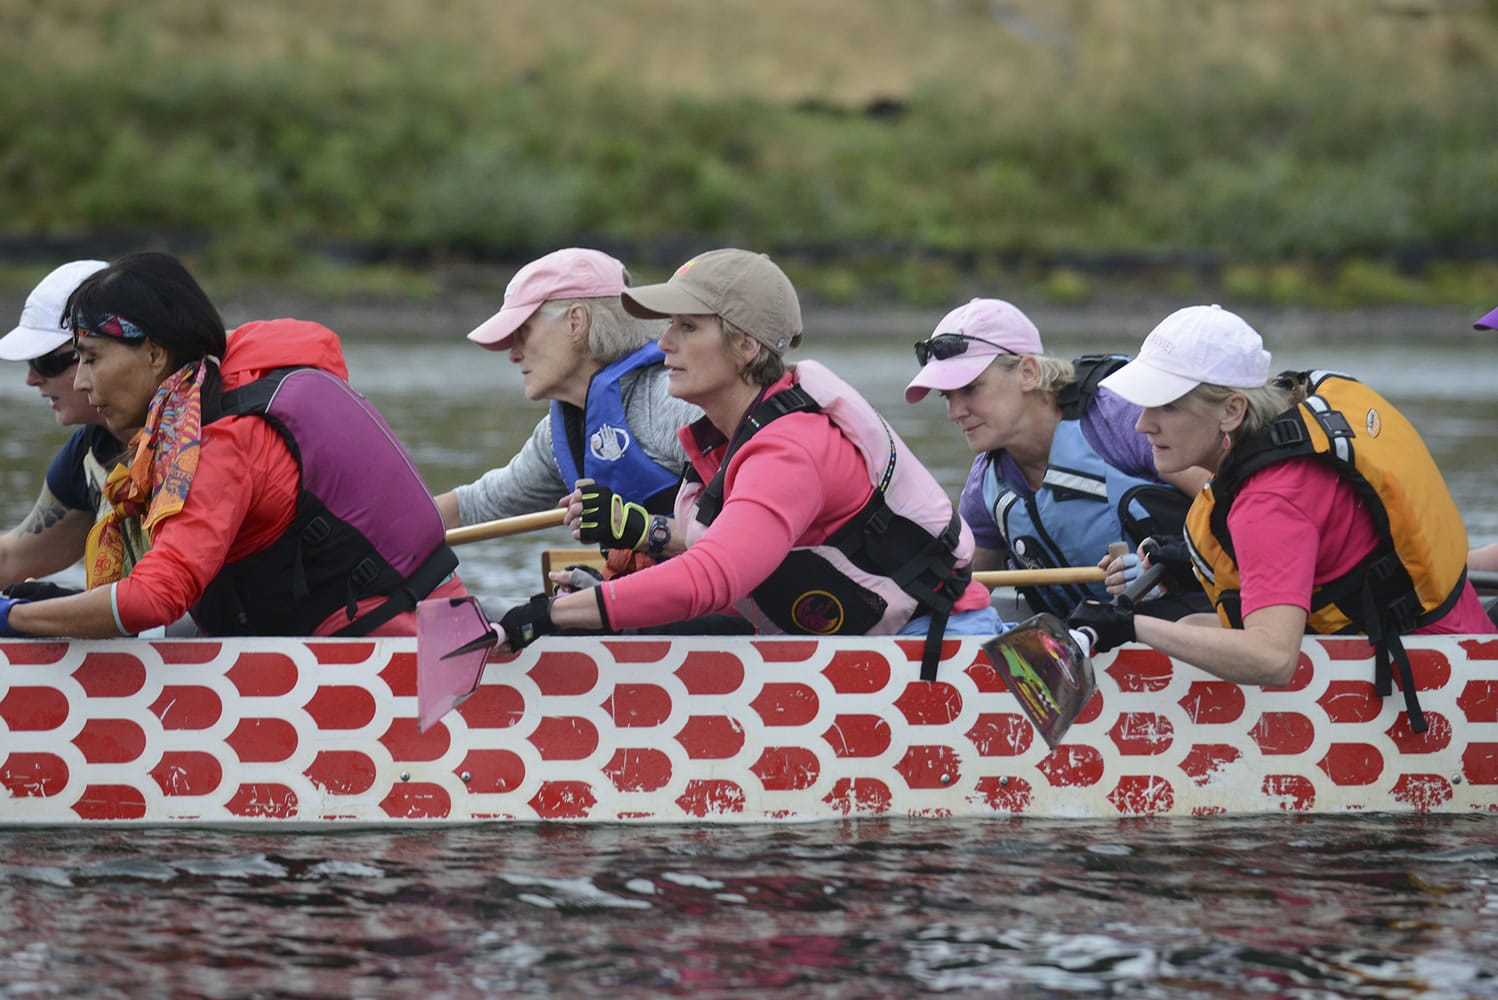 Mary Sullivan, center in orange life jacket, paddles with the Pink Phoenix dragon boat team at a practice on the Willamette River. Like the rest of the team, Sullivan and her twin, Meg Perlick (shown below on the left in purple T-shirt), are breast cancer survivors.